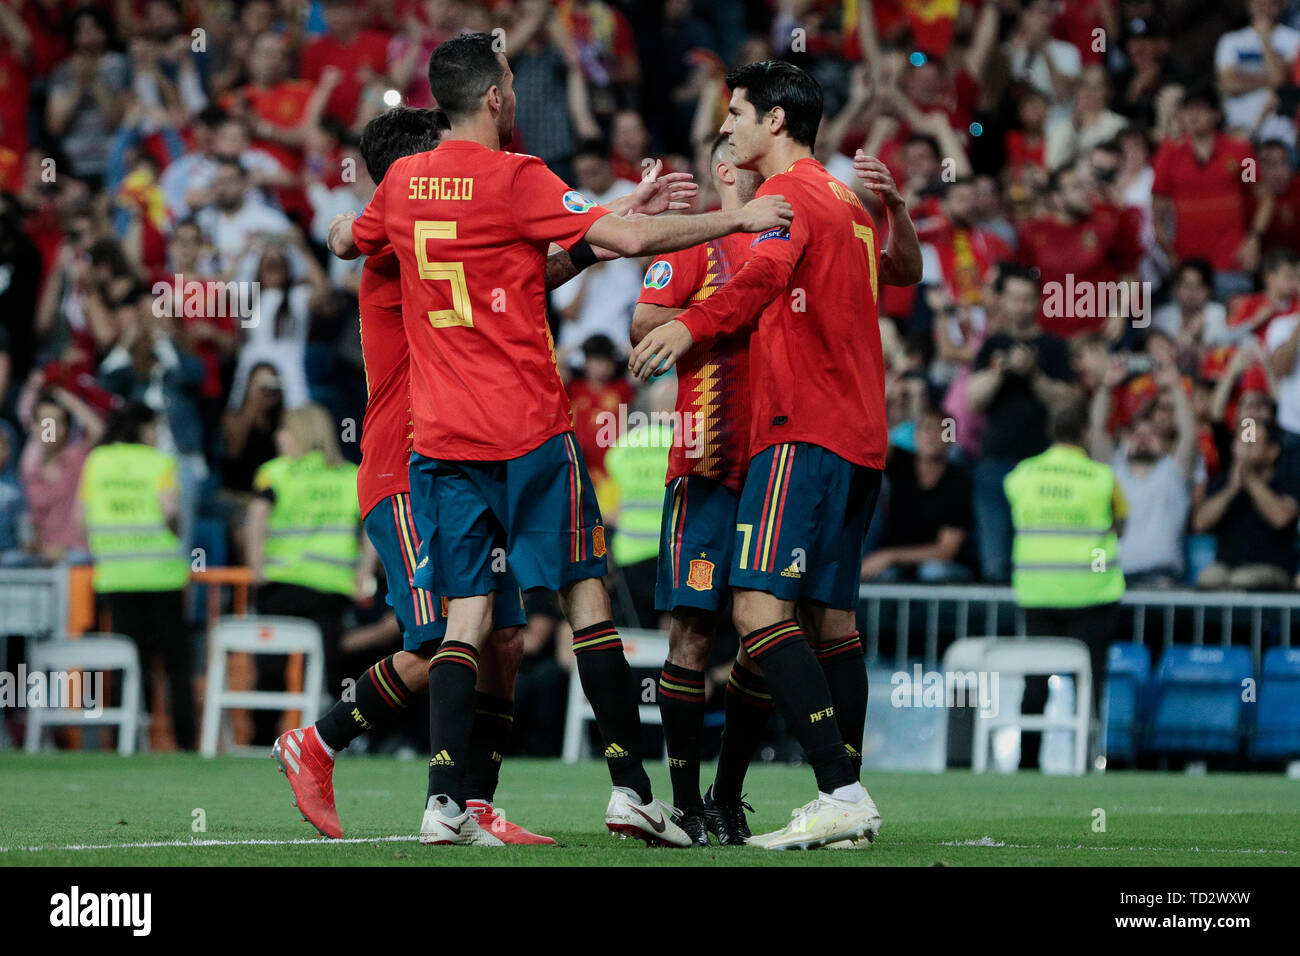 Spain national team players celebrate during the UEFA EURO 2020 Qualifier  match between Spain and Sweden at Santiago Bernabeu Stadium in Madrid.  Final score: Spain 3 - Sweden 0 Stock Photo - Alamy